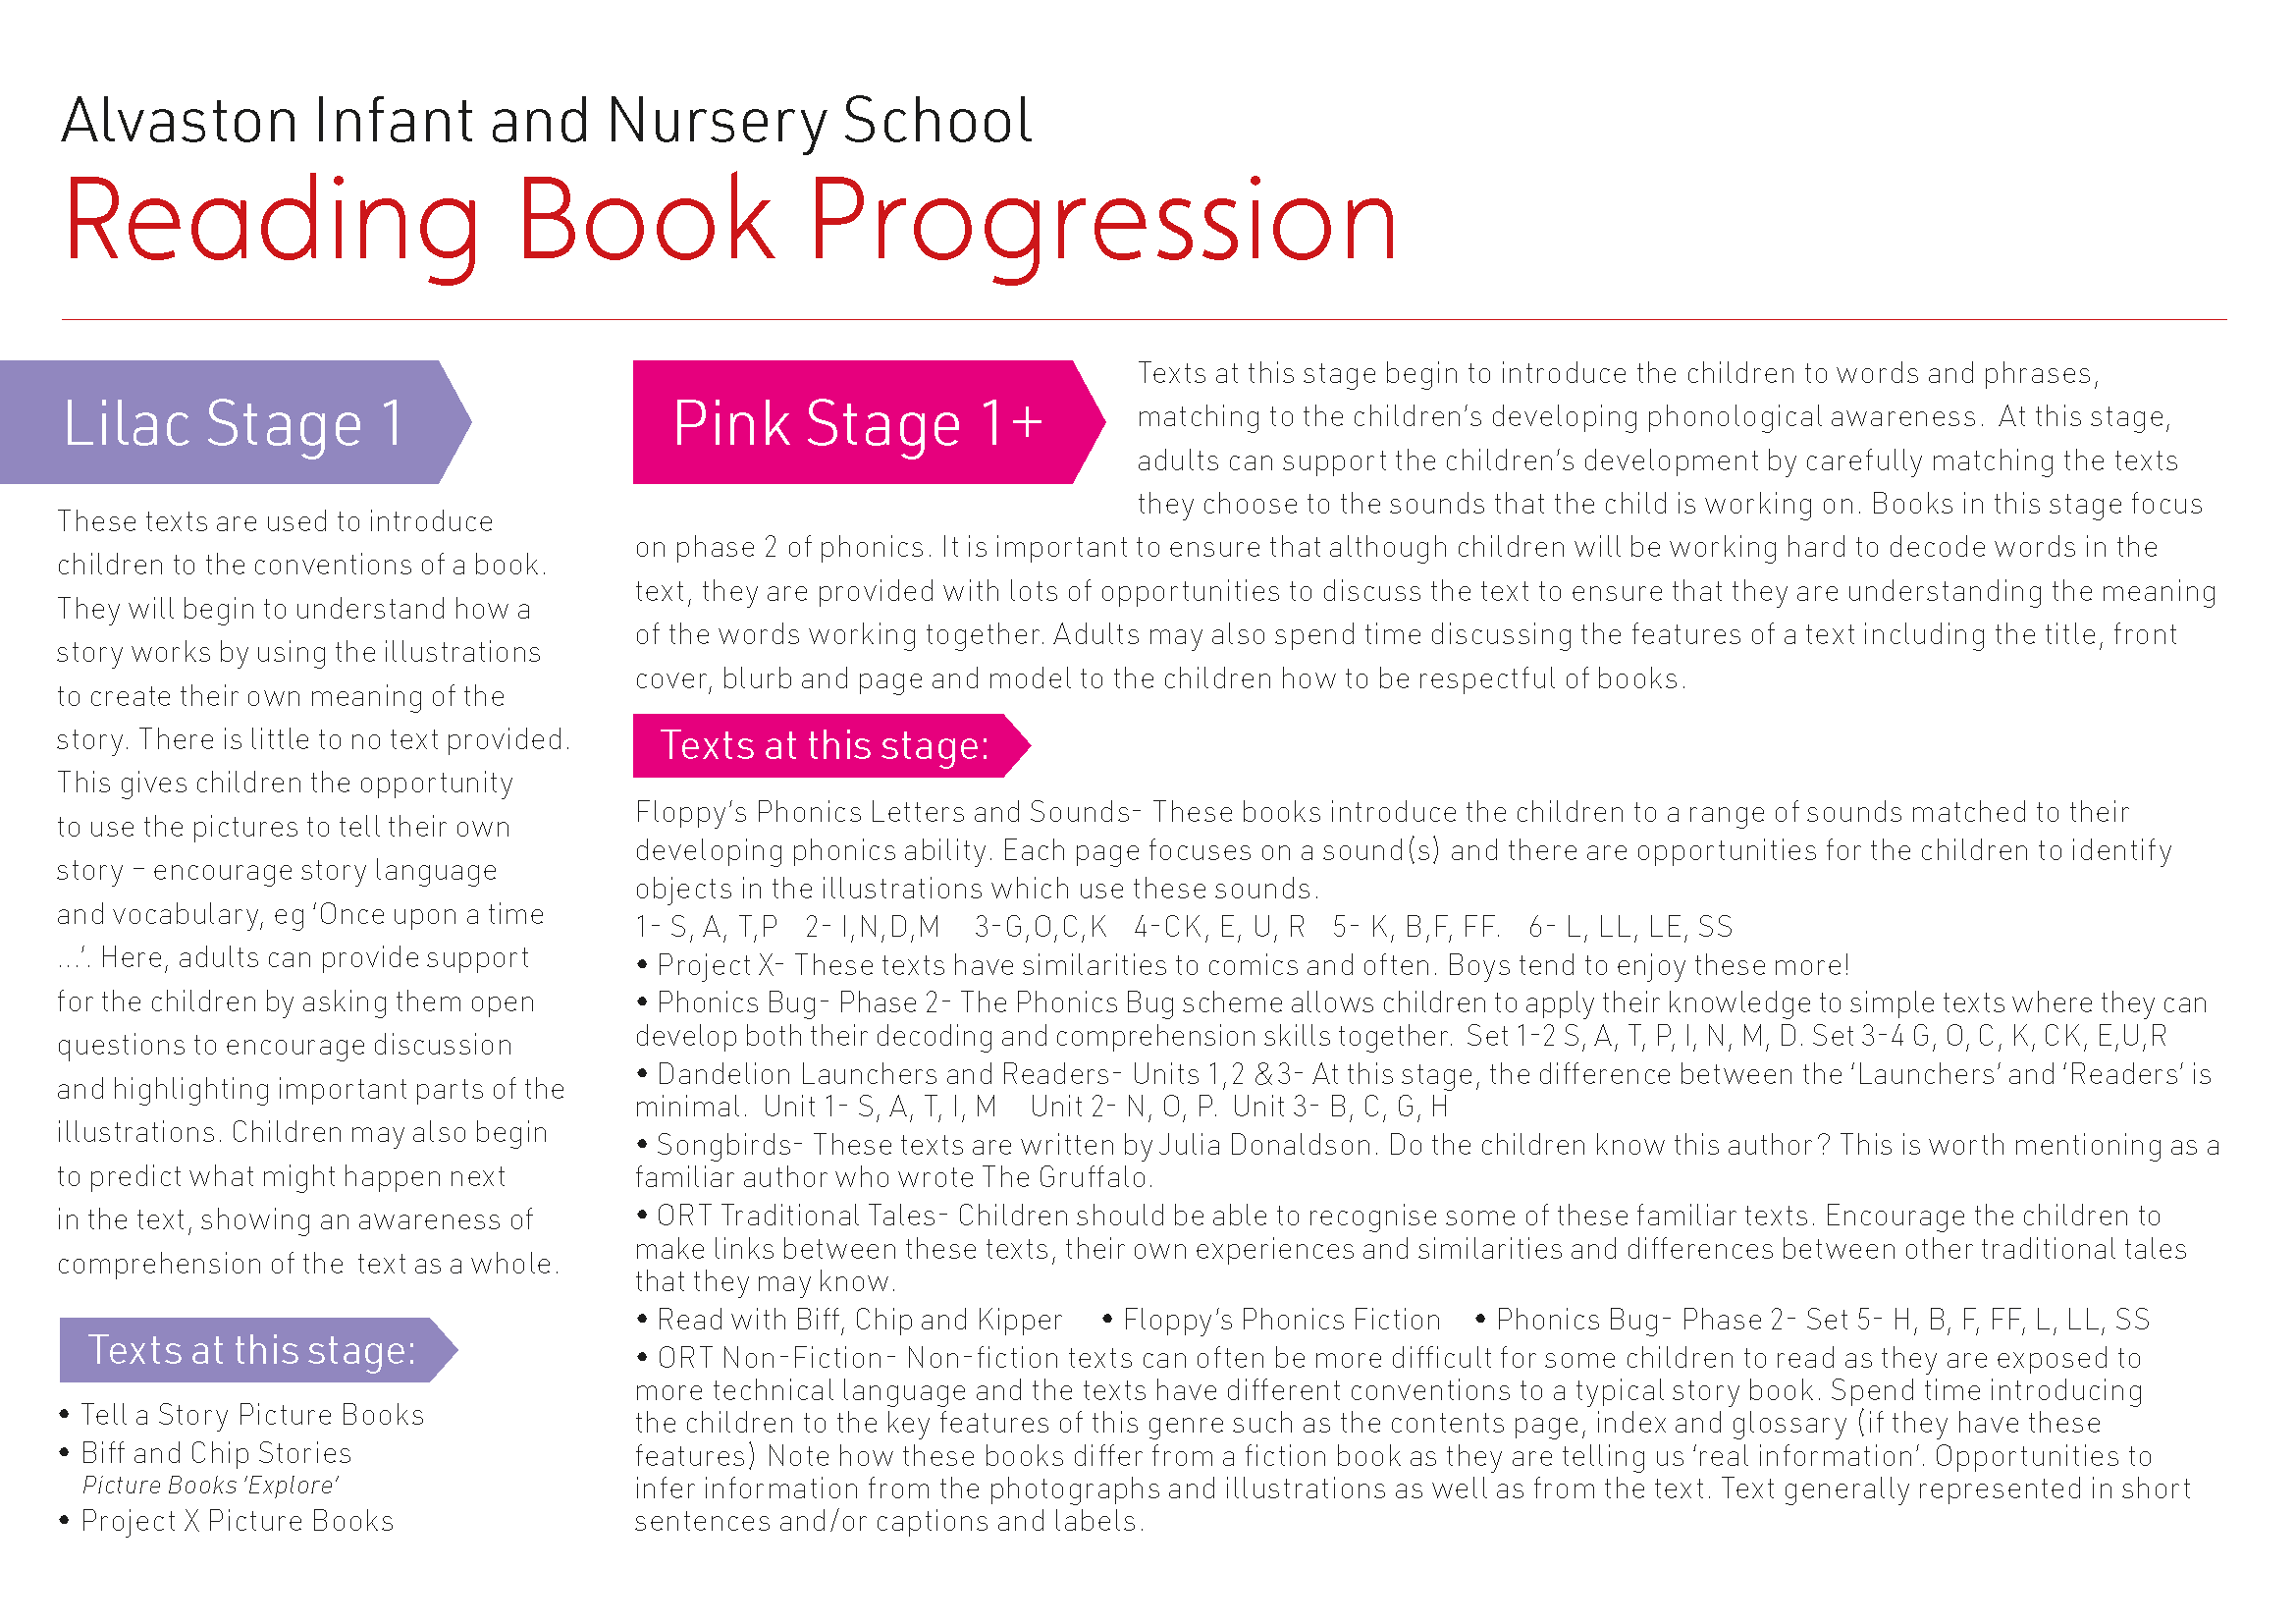 AIN Reading Book Progression_Page_2.png